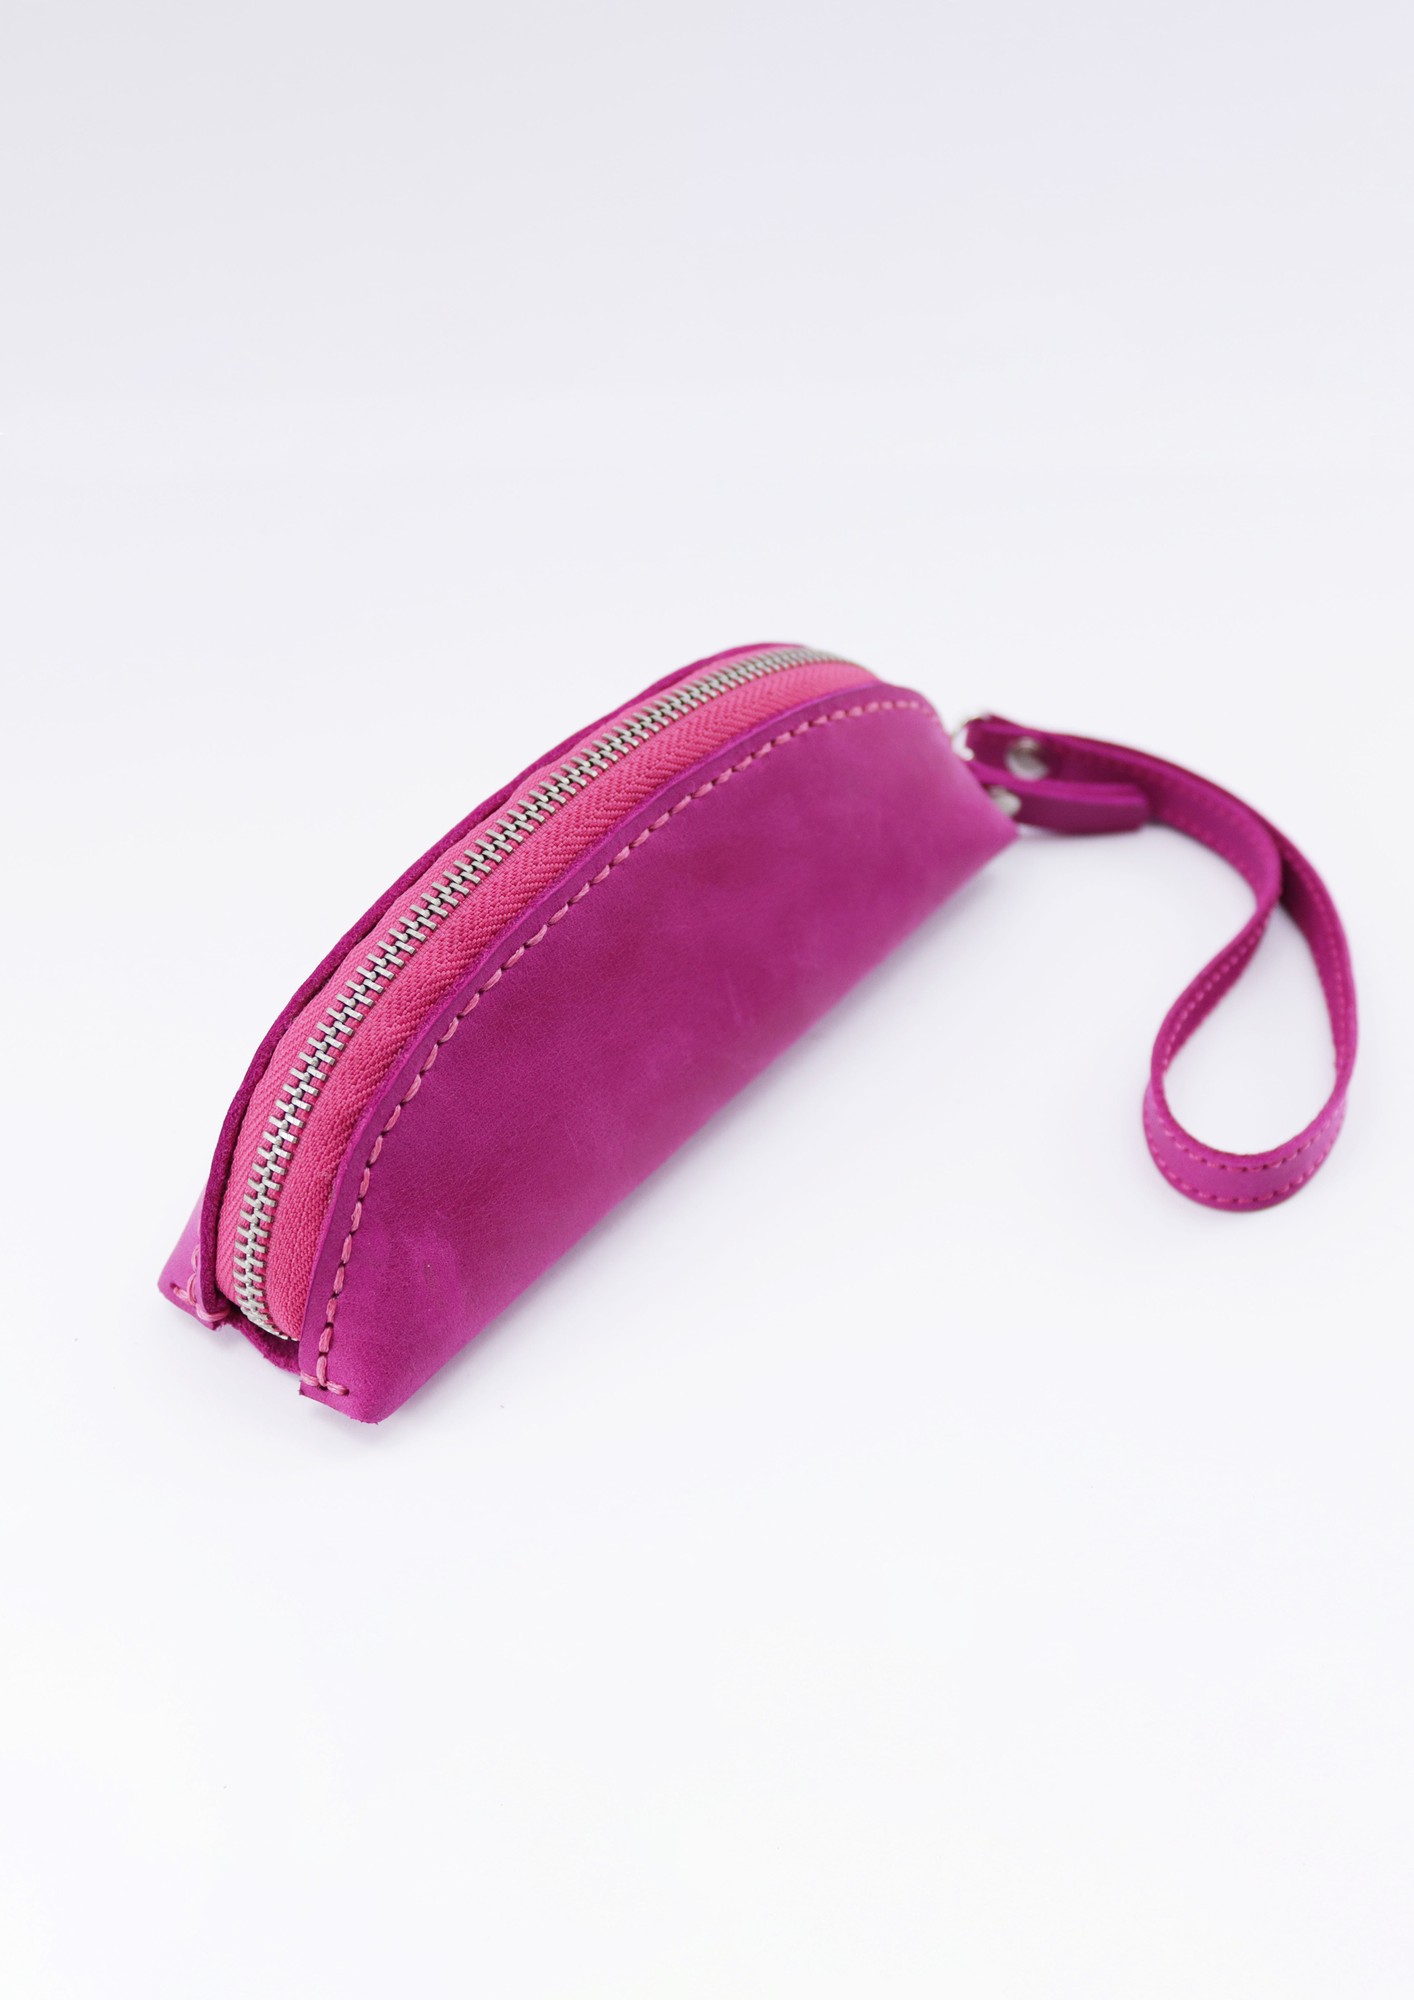 Women's Leather Half Round Glasses/ Sunglasses Case with Zipper and Hand Strap/ Pink/ 04005